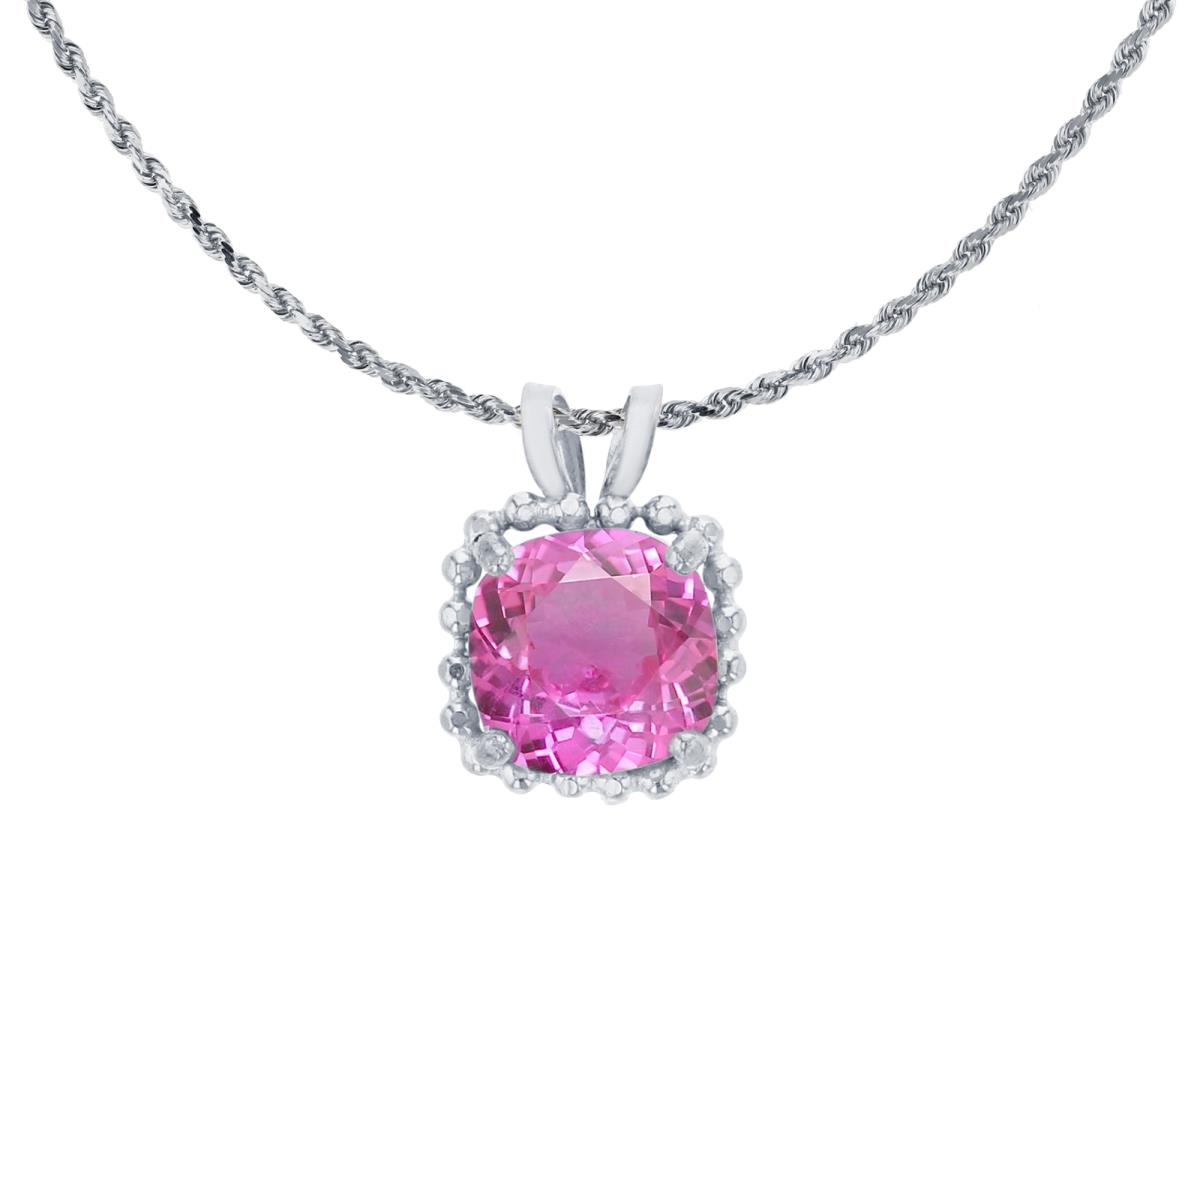 10K White Gold 6mm Cushion Cut Created Pink Sapphire Bead Frame Rabbit Ear 18" Rope Chain Necklace